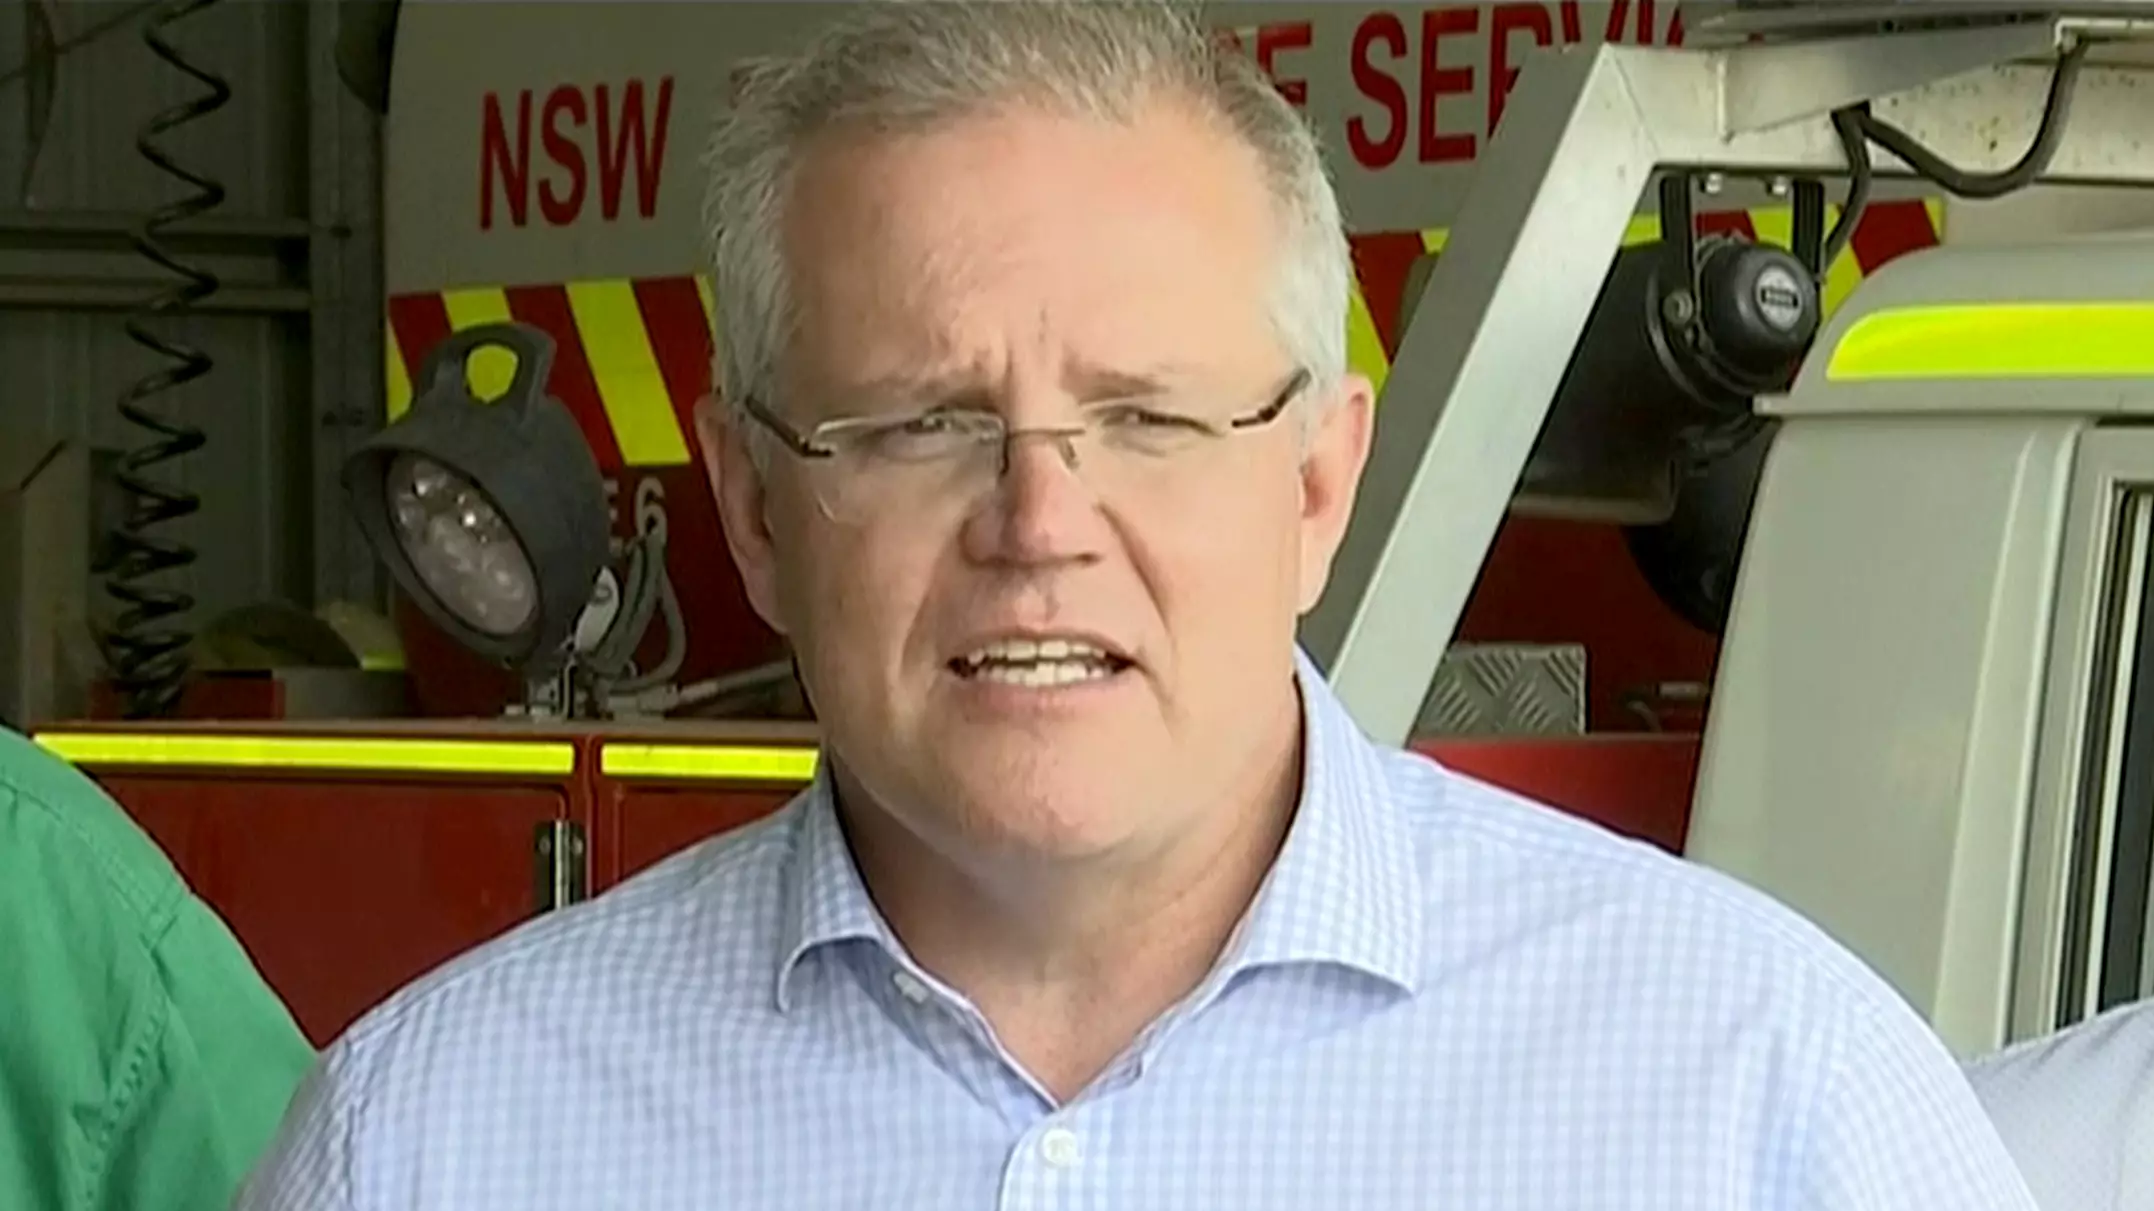 Scott Morrison’s New Year’s Message Has Left A Lot Of People Angry